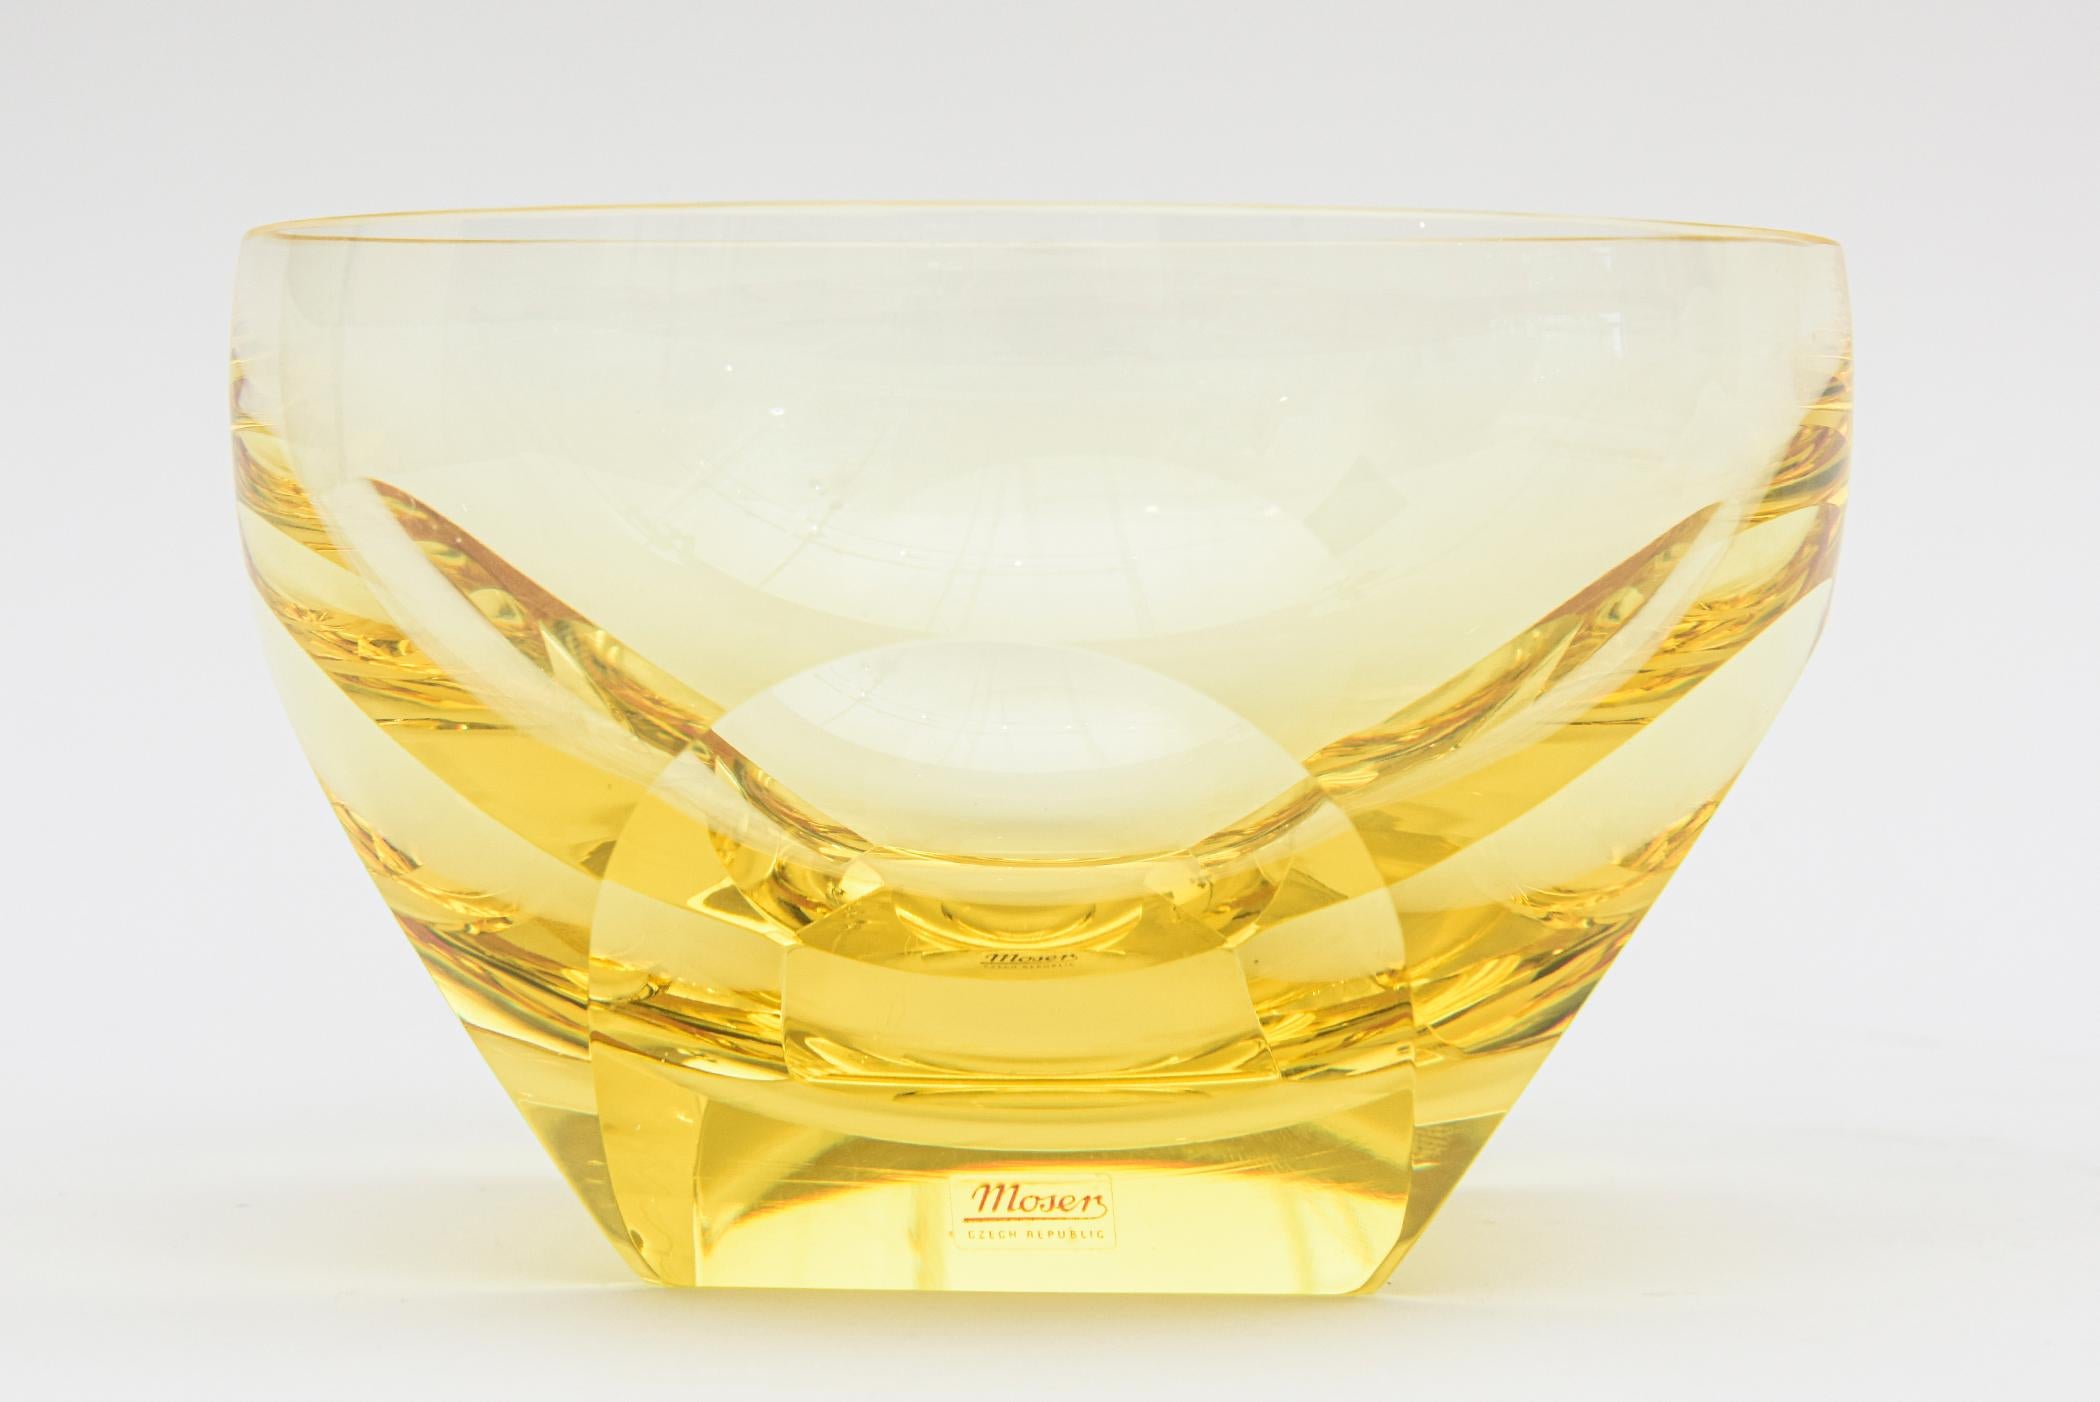 This lovely bowl glass by the Moser glass works in the Czech Republic has faceted sides. It is vintage from the 70's and is a beautiful light color of yellow. This would make great barware for a nut or candy bowl or for any your entertaining needs.